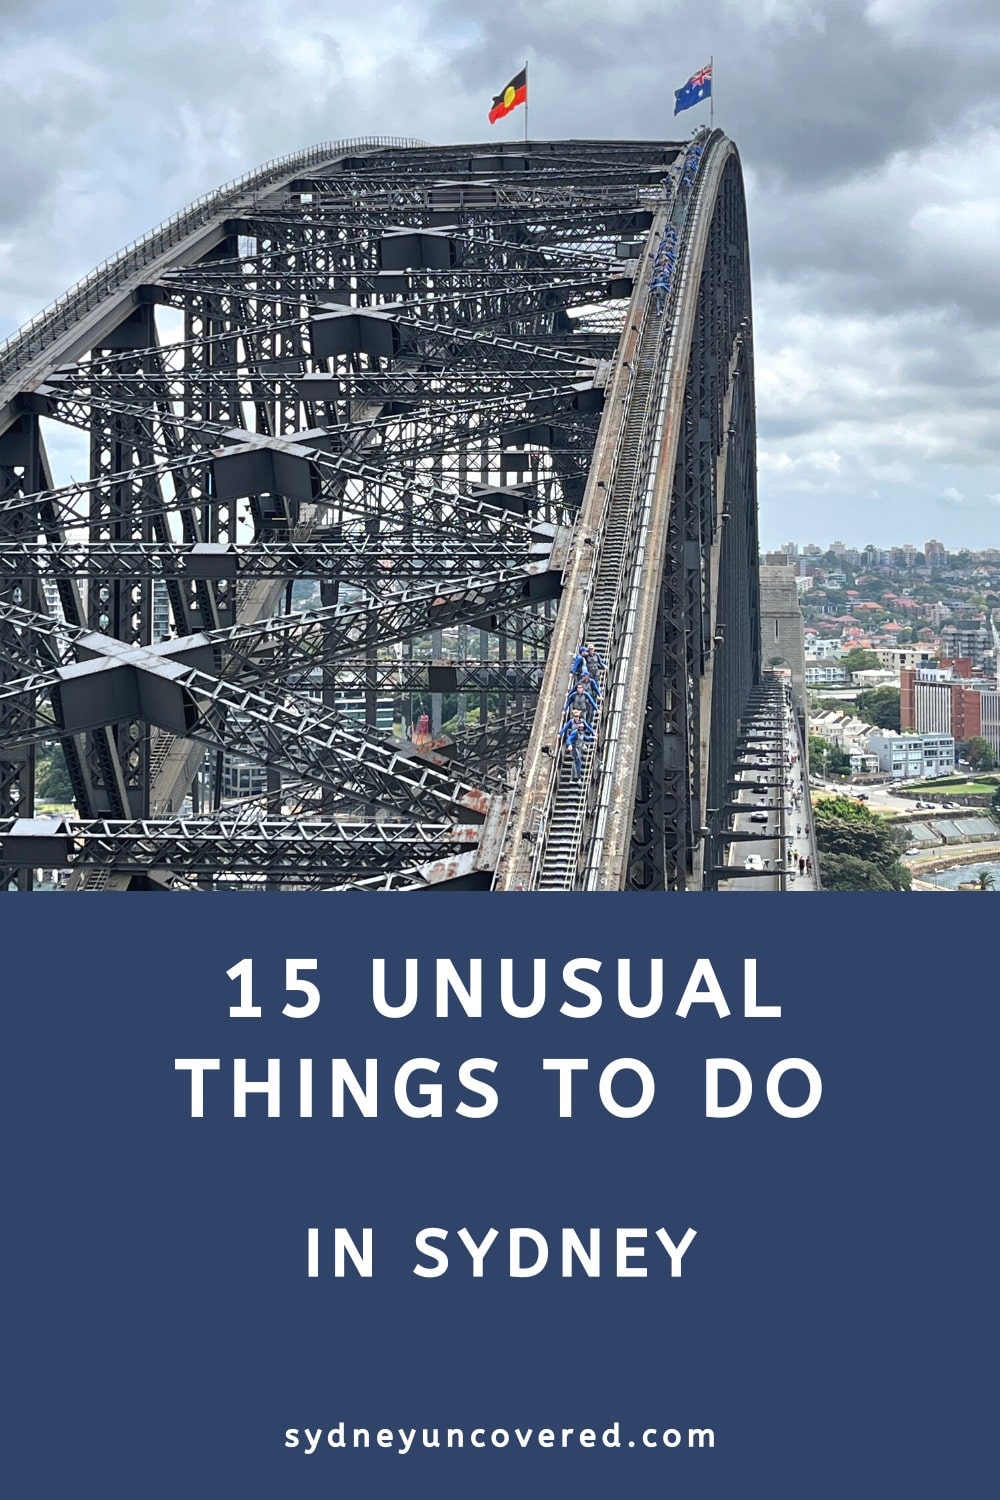 15 Unusual things to do in Sydney